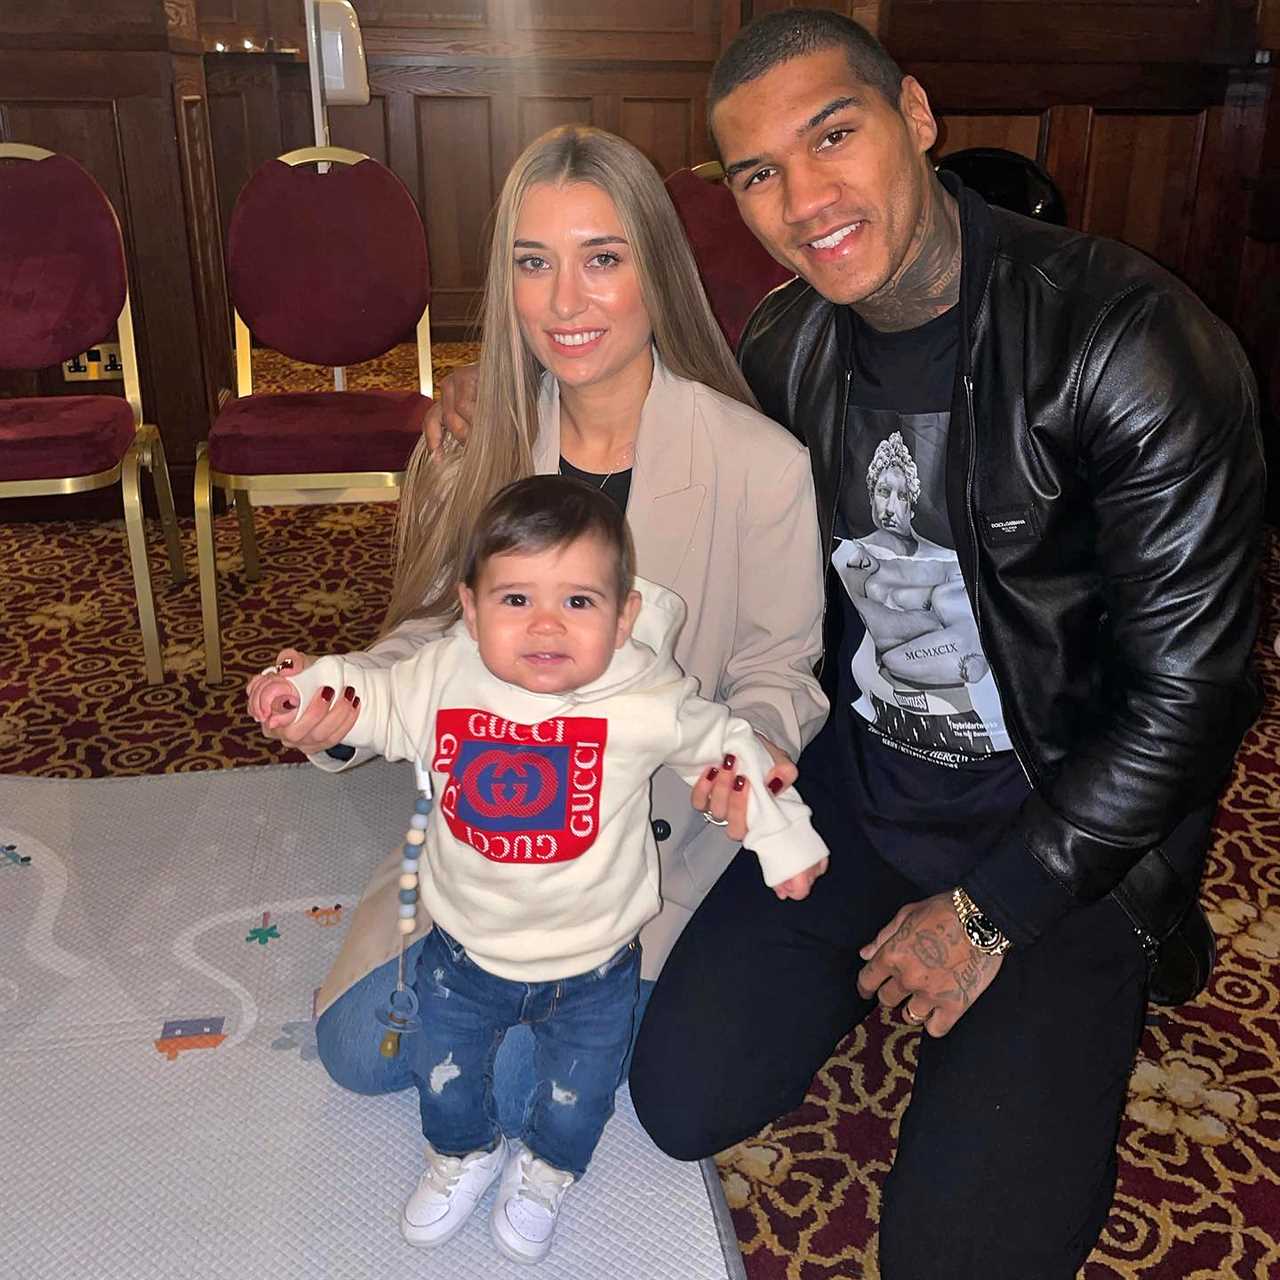 Victoria Benn, Conor Benn's spouse, is horrified that a thief broke in while she was home with her baby boy